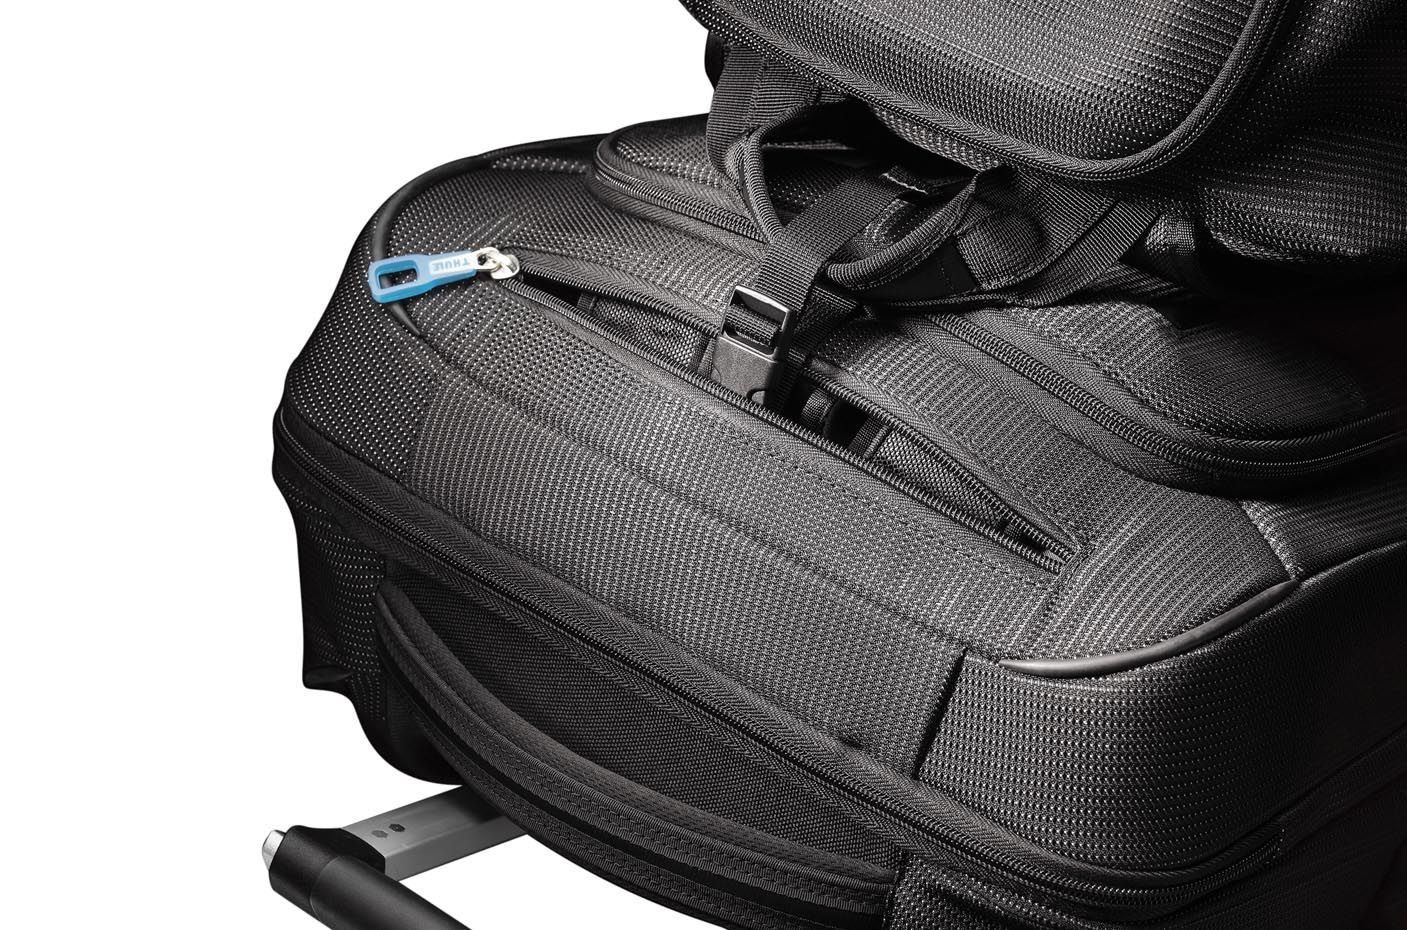 Thule Crossover 56cm/22" Rolling Carry-On